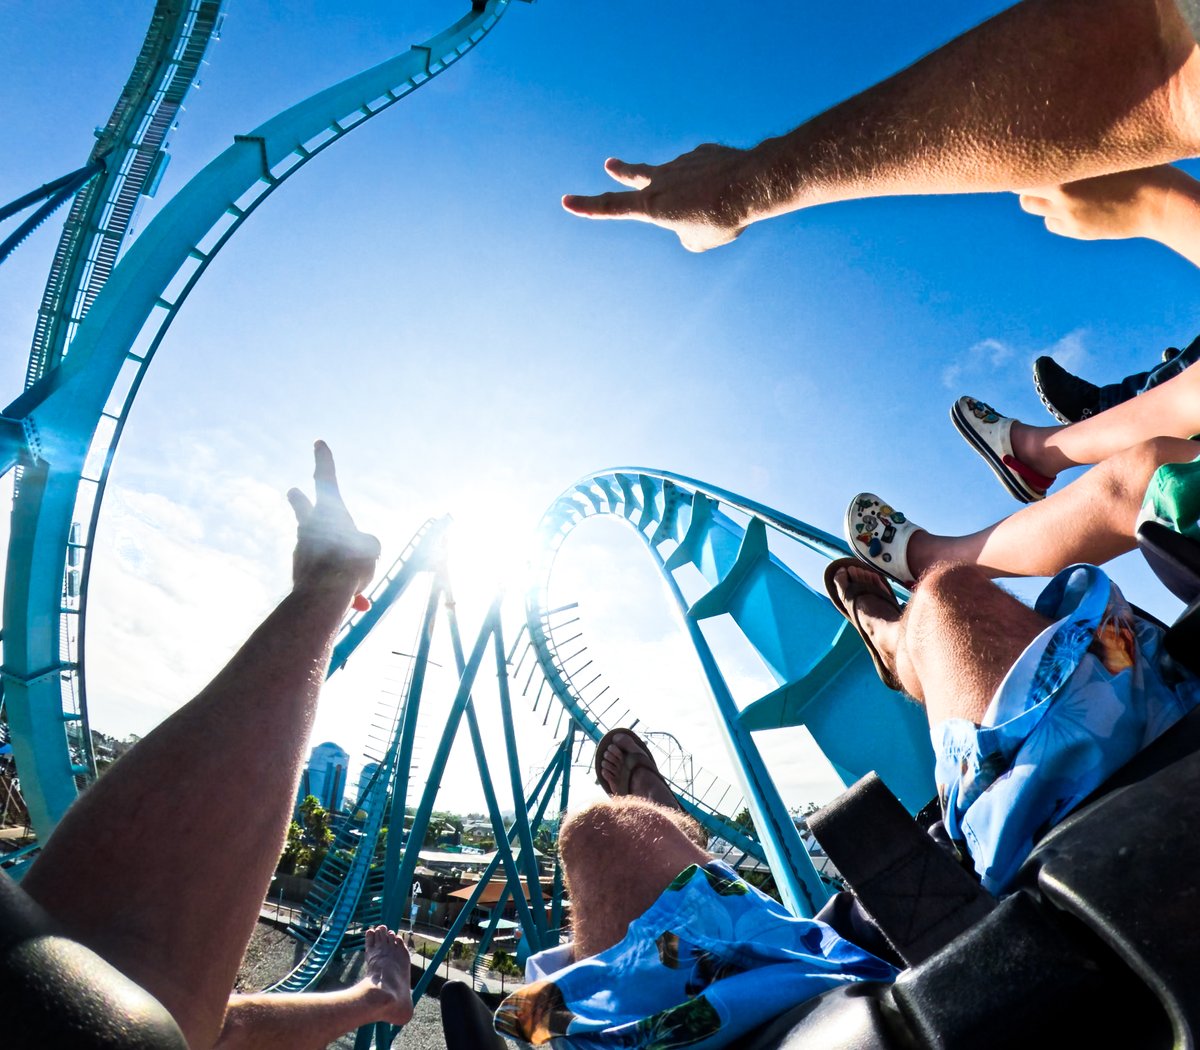 Photo of the Day: Look mom, no hands ✌️ POV from GoPro Subscriber Tyler Jordan's #GoProHERO12 Black for a $500 GoPro Award. #ProTip: Snap photos hands-free with Interval Photo Mode on HERO12 Black. #GoPro #GoProPOV #Rollercoaster